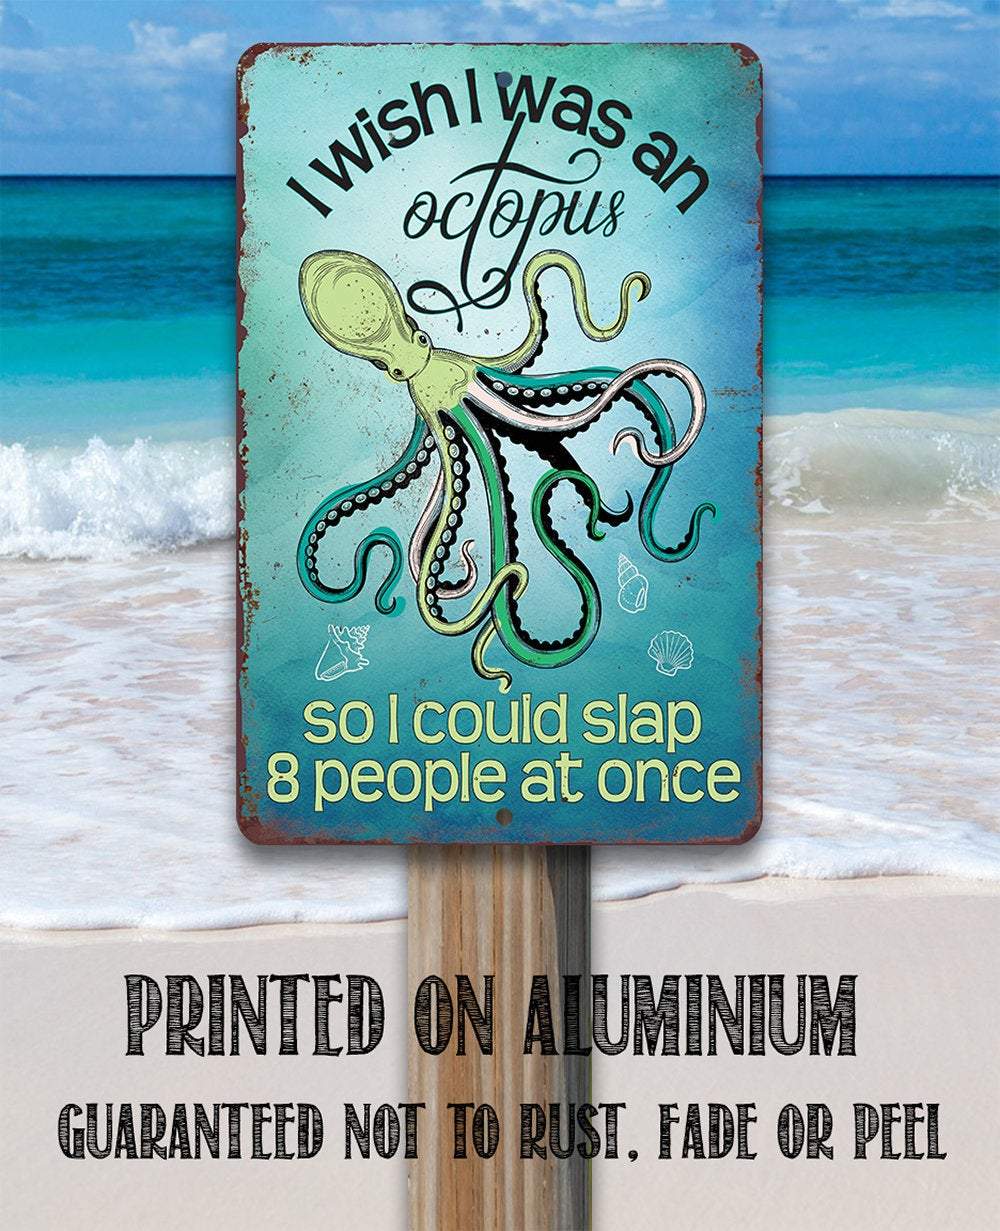 I Wish I Was An Octopus - Metal Sign | Lone Star Art.